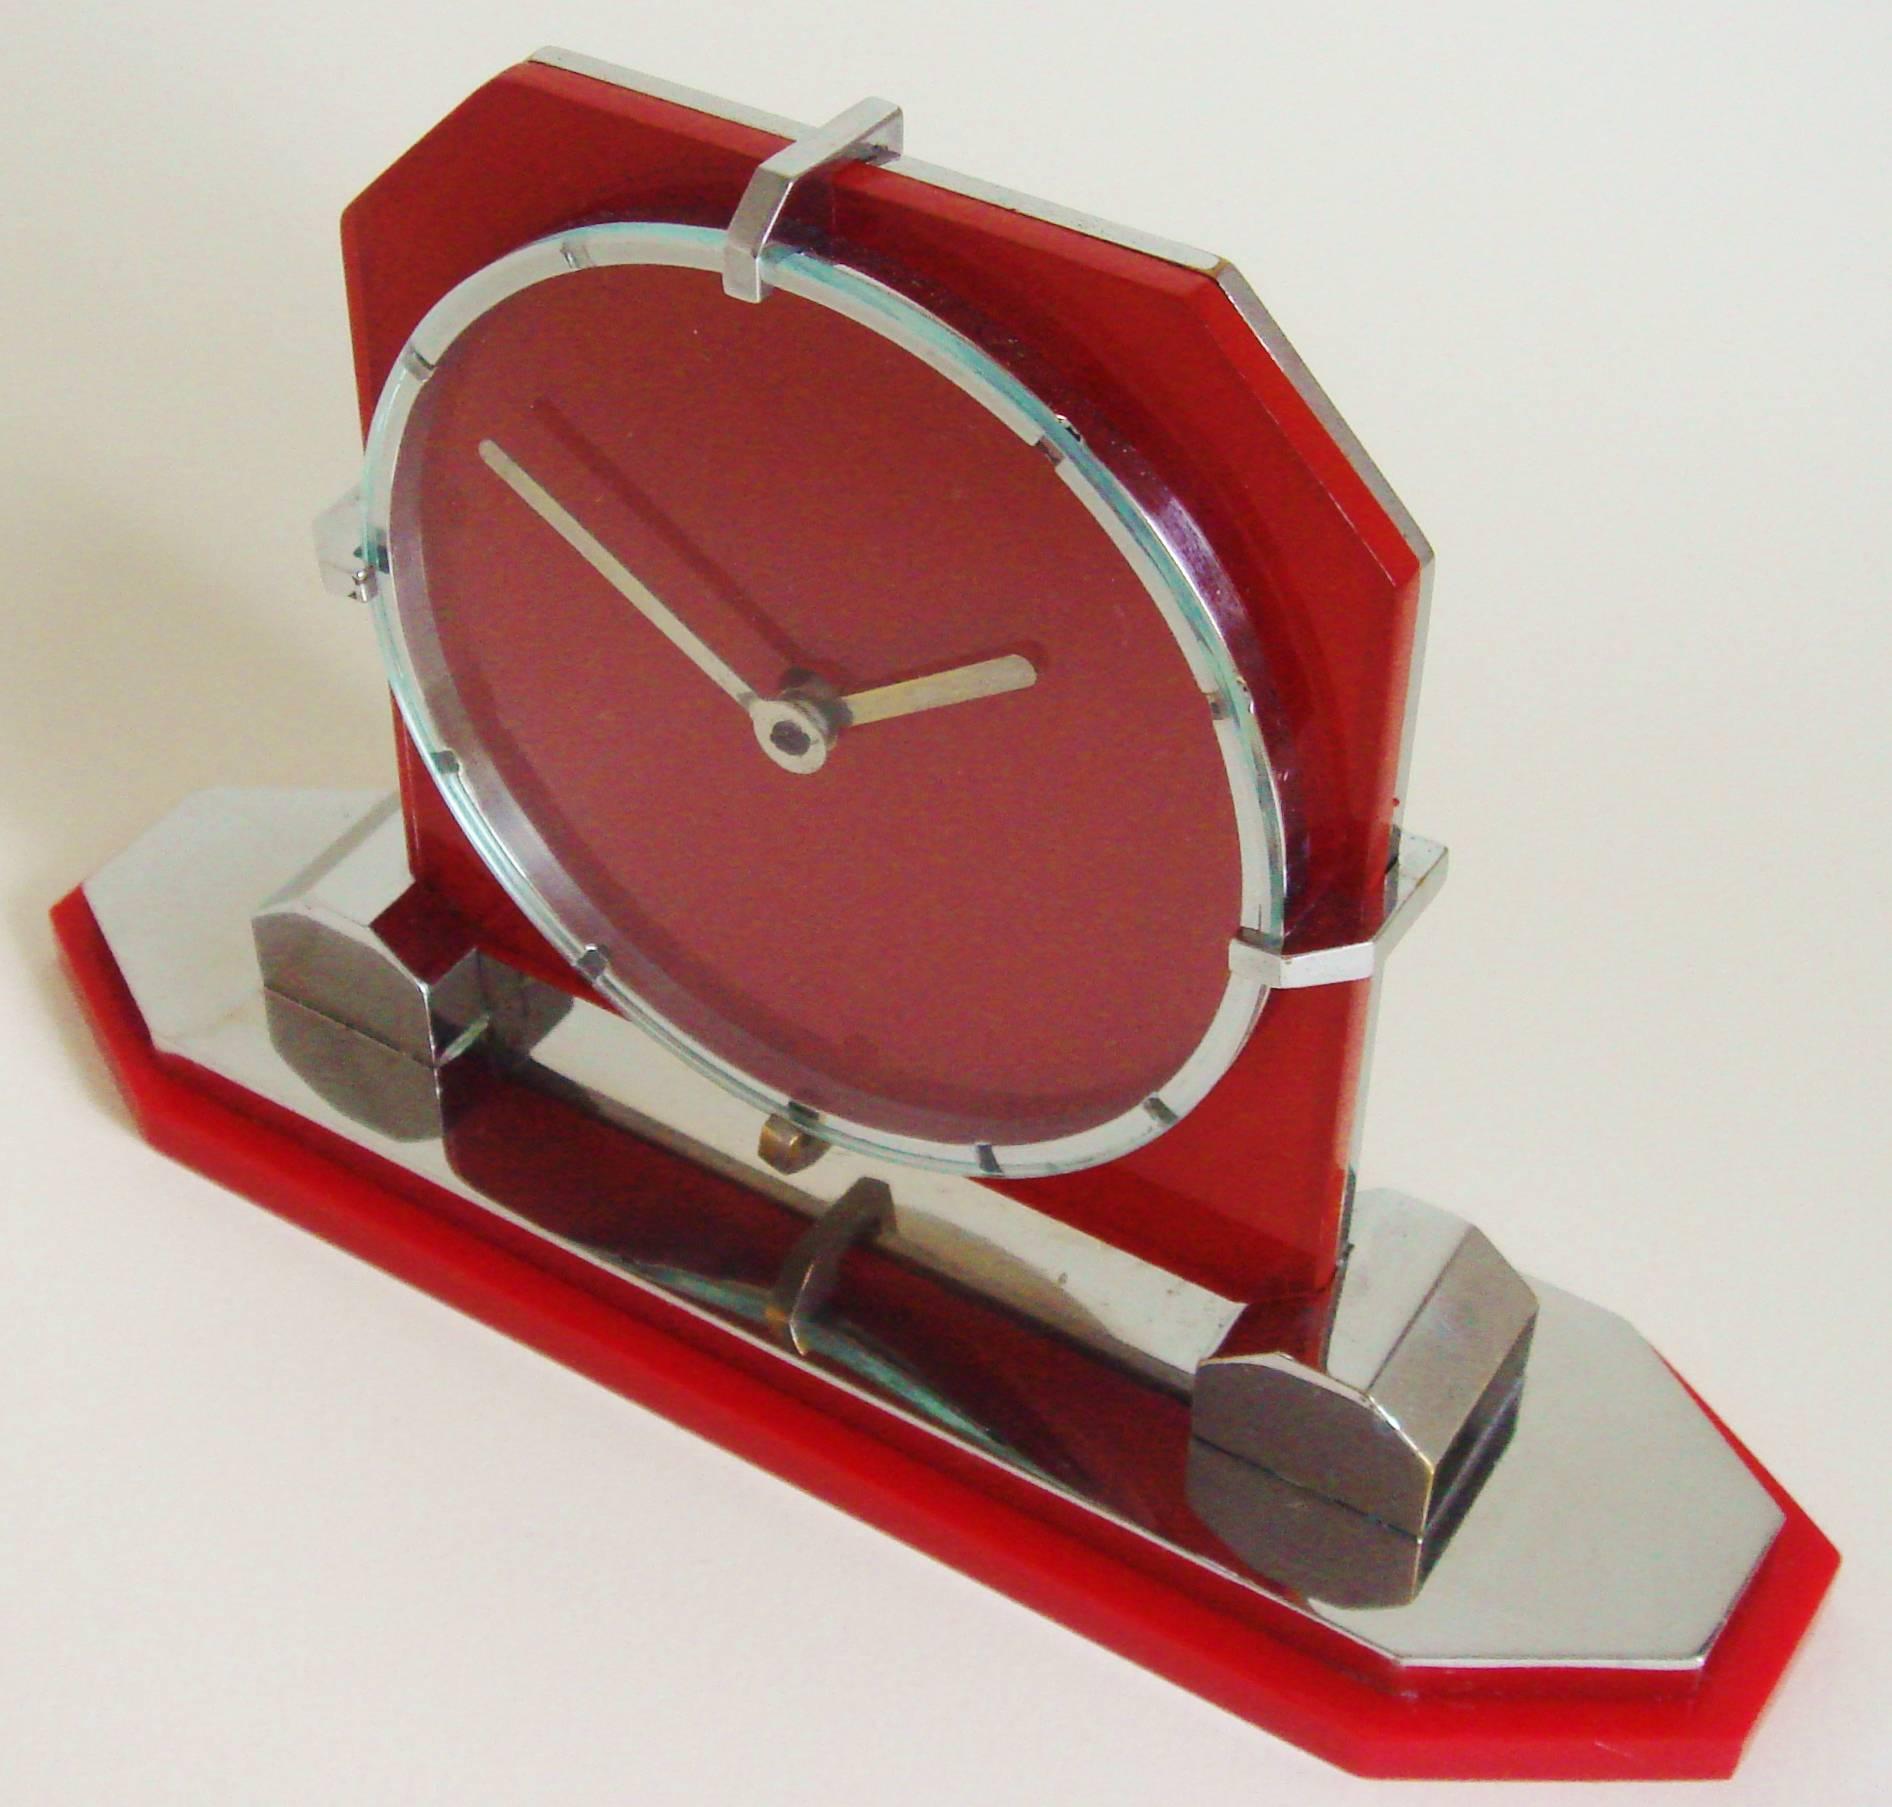 This exquisite pre-war English Art Deco chrome desk clock features a red glass face-plate backed with chrome that is mounted to a red Lucite base and is stamped to the obverse with an English patent number for 1932. This particular example was